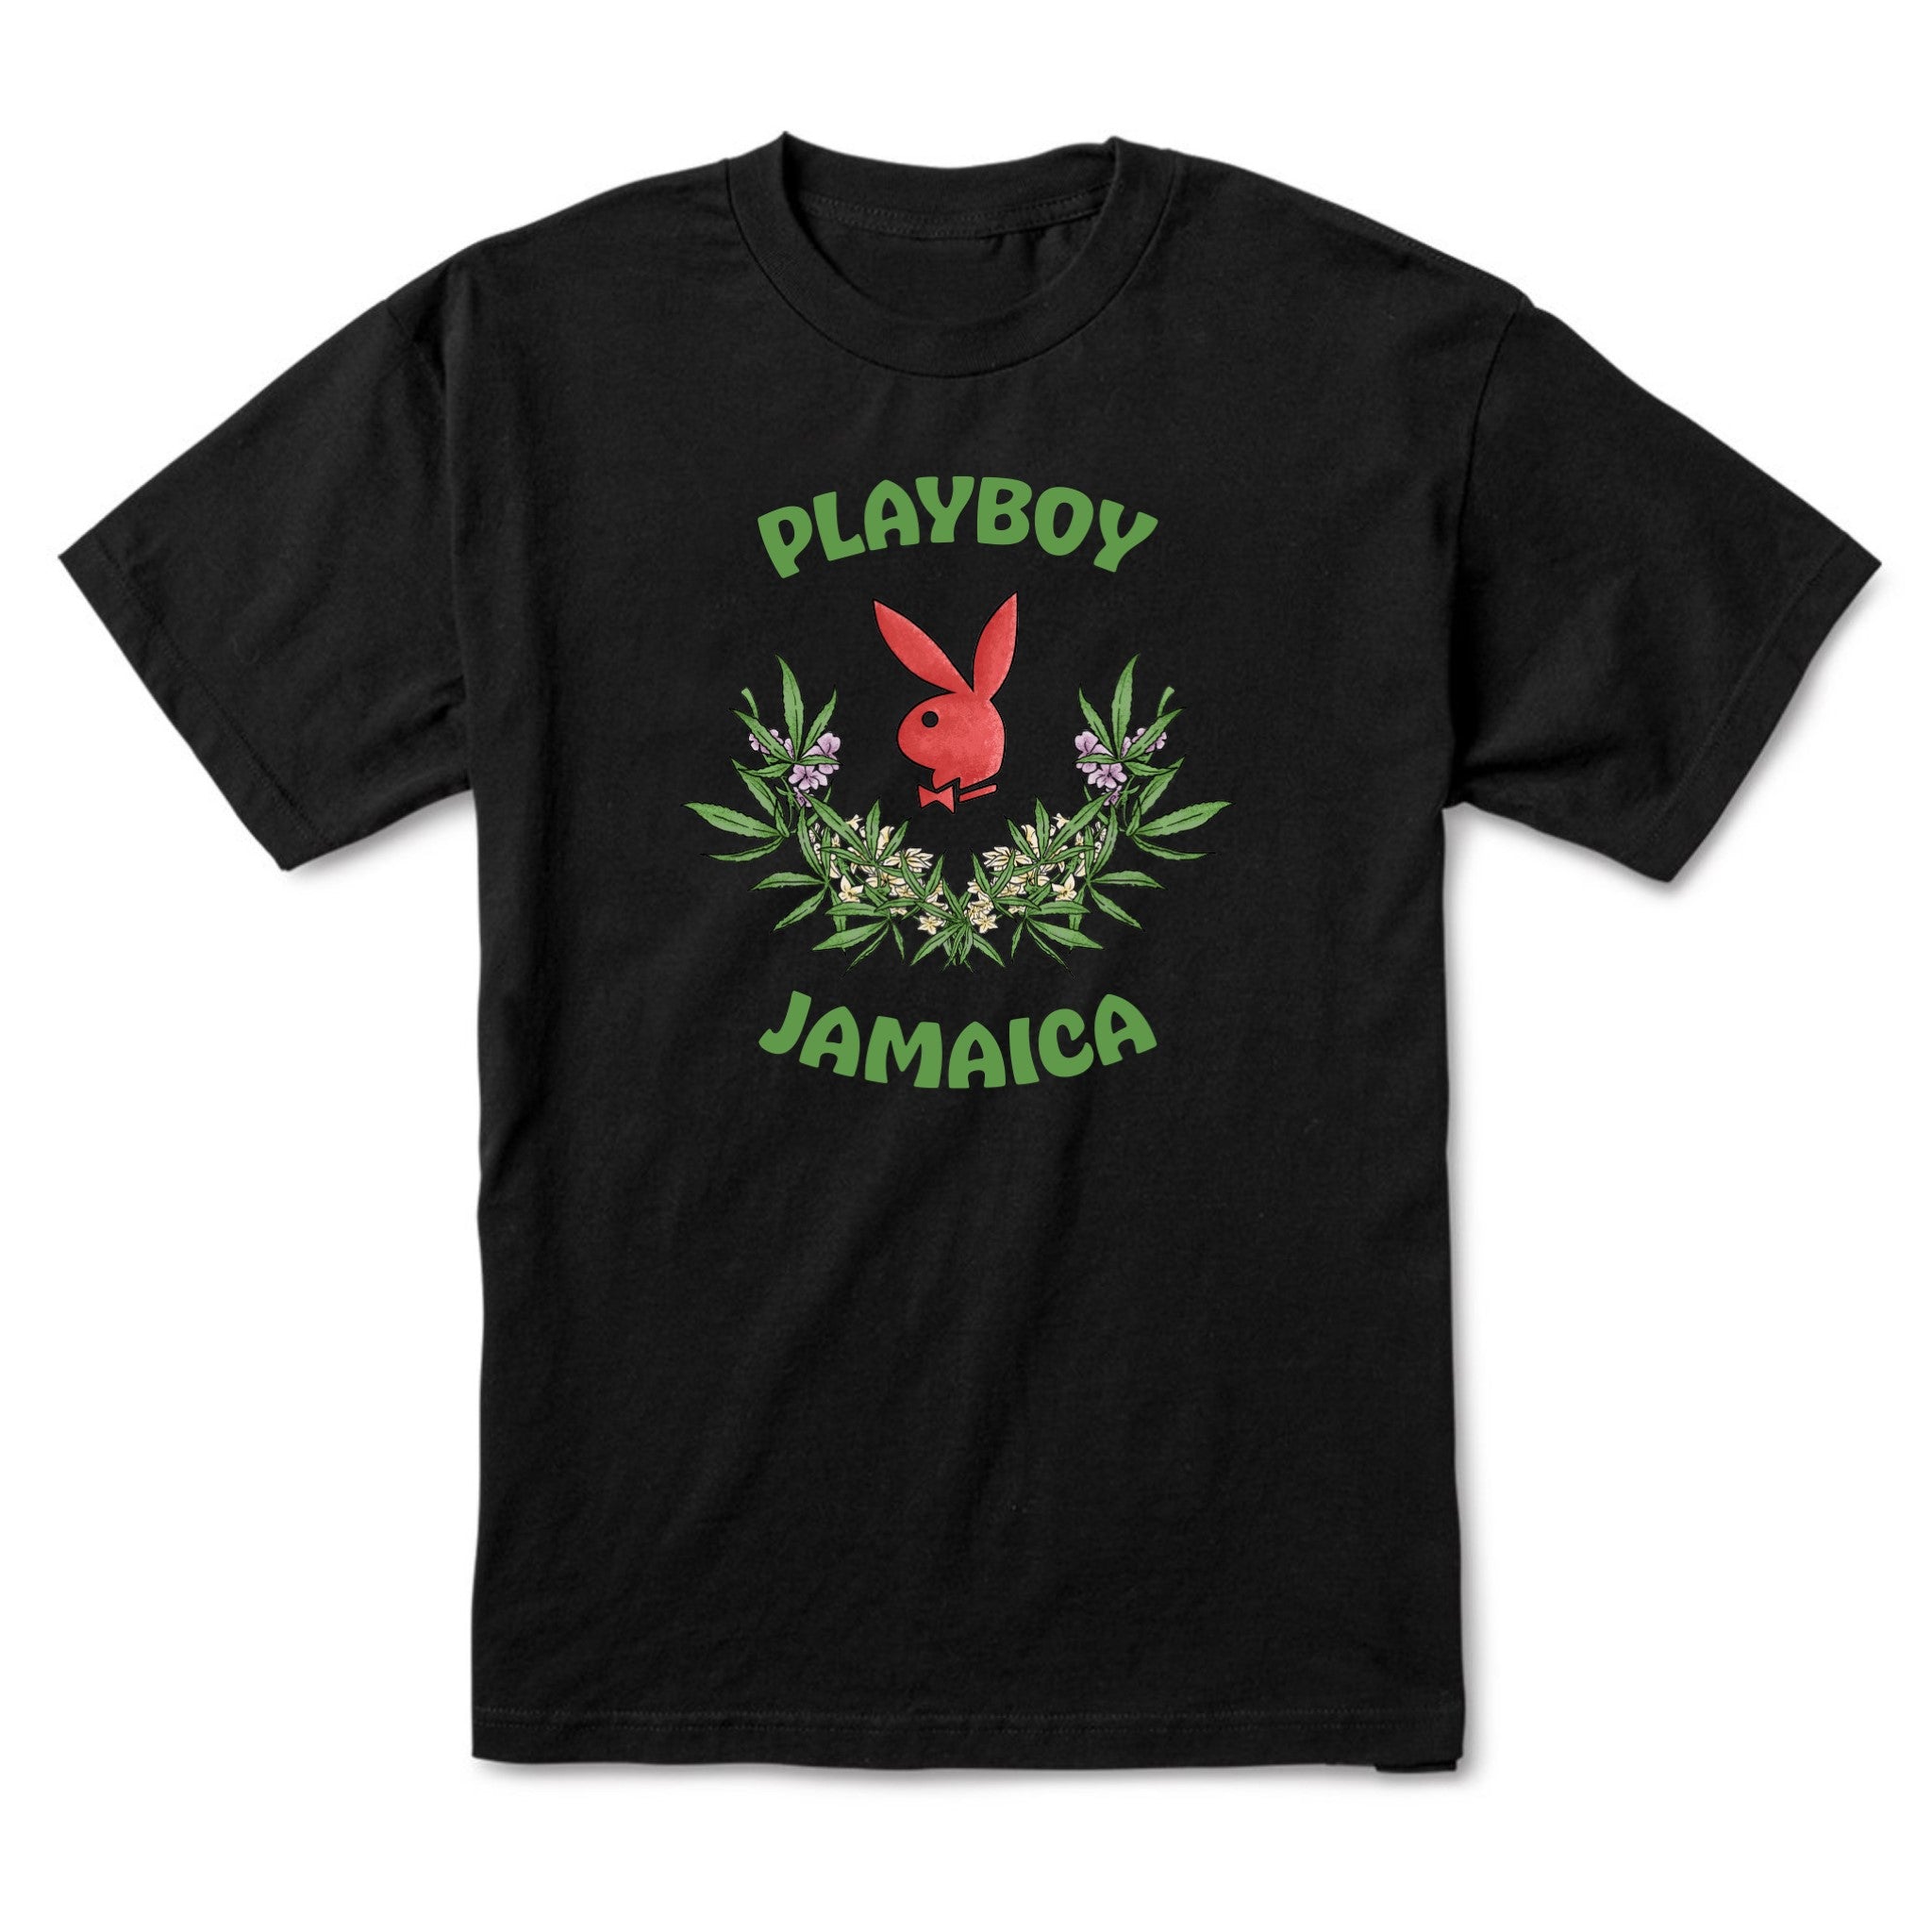 The Playboy T-Shirt: Official Playboy T-Shirts | Playboy.com – Page 9